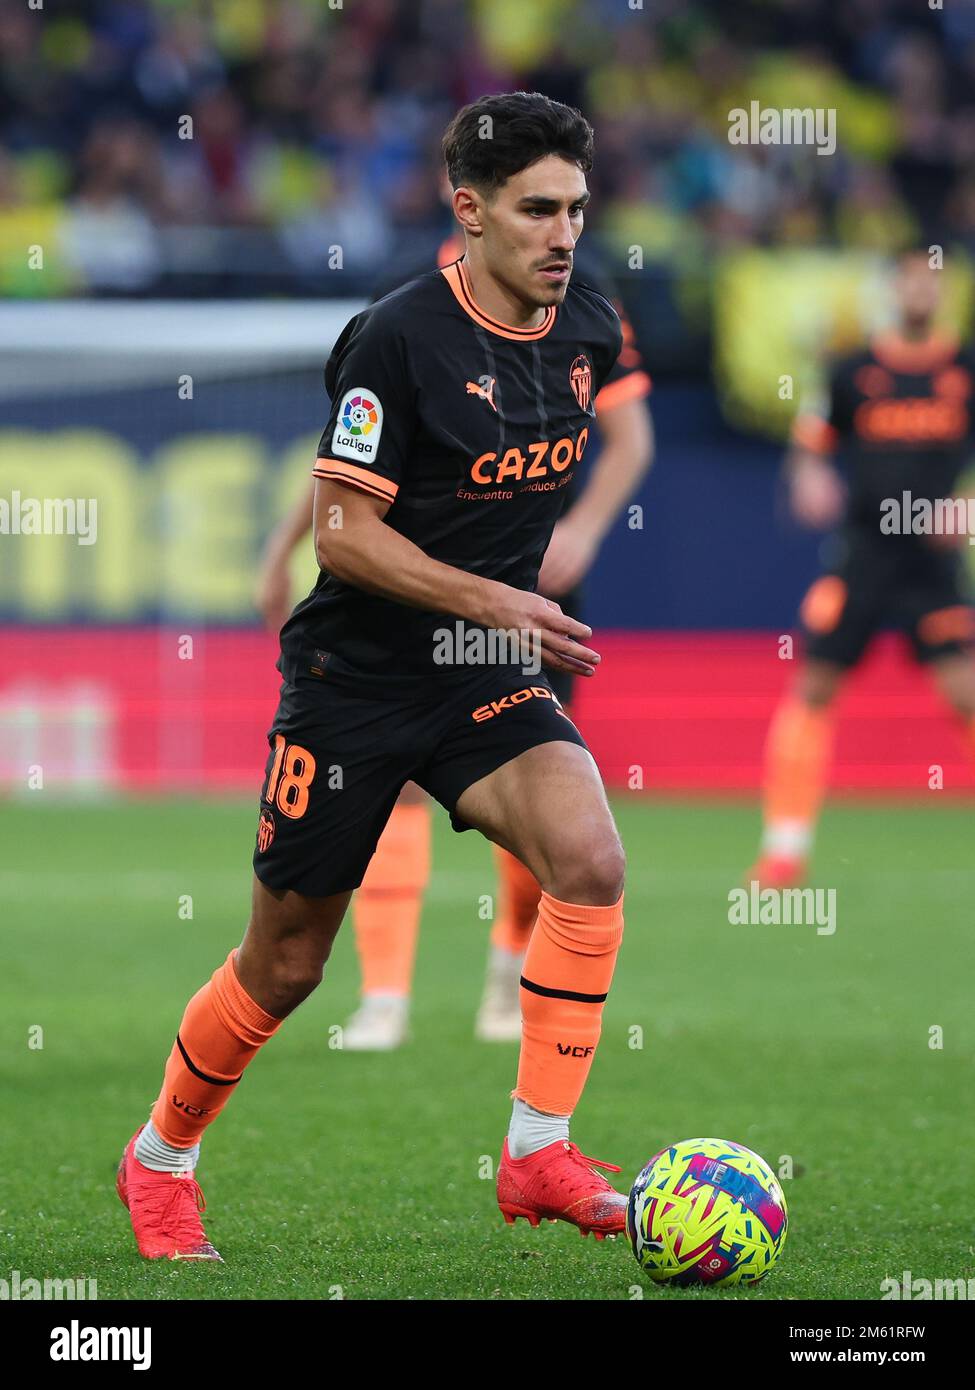 Andre Almeida of Valencia CF in action during the La Liga match between Villarreal CF and Valencia CF at Estadio de la Ceramica in Villarreal, Spain. Stock Photo